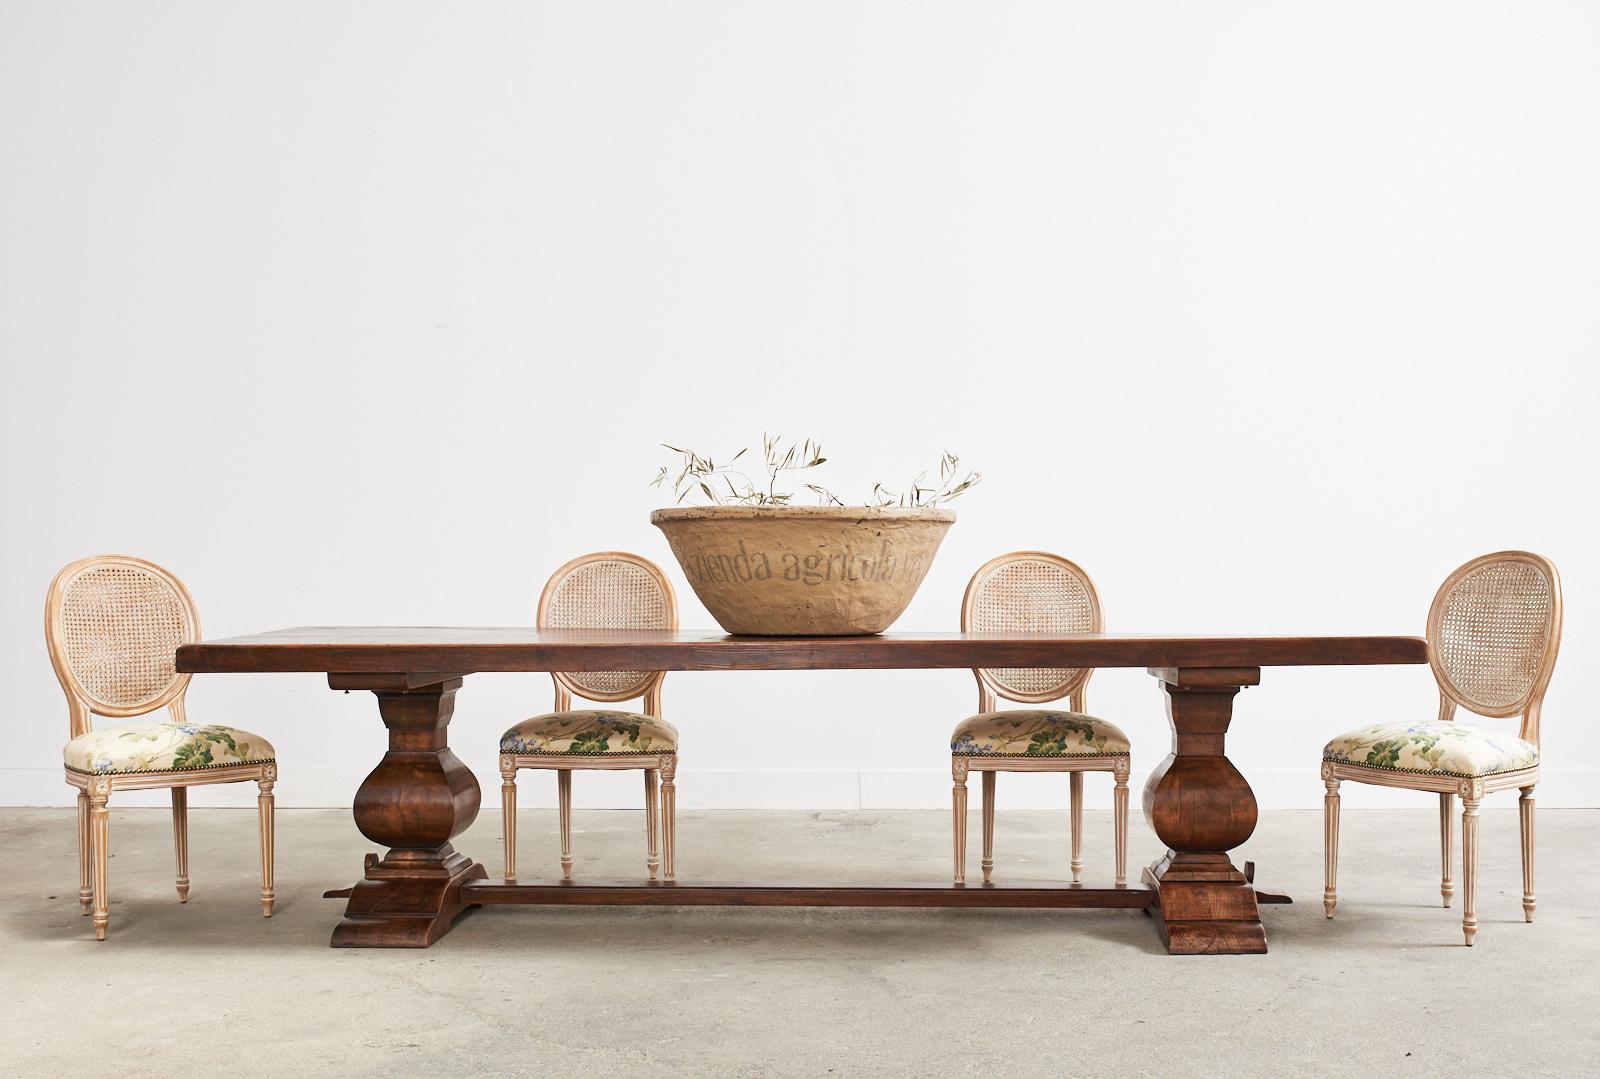 Rustic early 20th century monumental Italian monastery style dining table or refectory table crafted from walnut. The table features a large plank top measuring nearly three inches thick and almost 10 feet long. The table is supported by a large